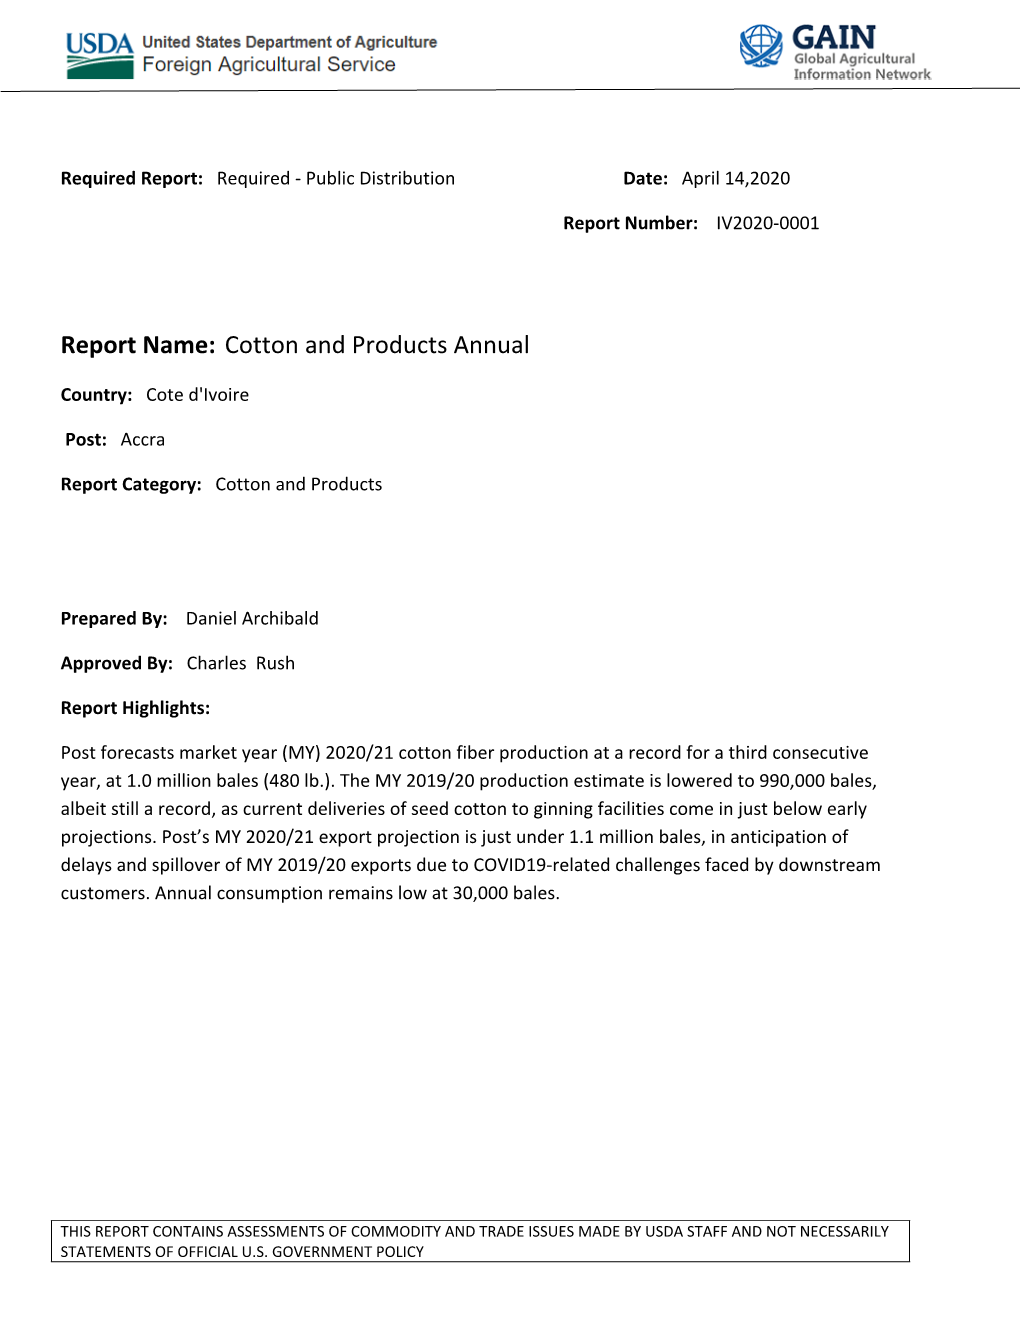 Report Name: Cotton and Products Annual